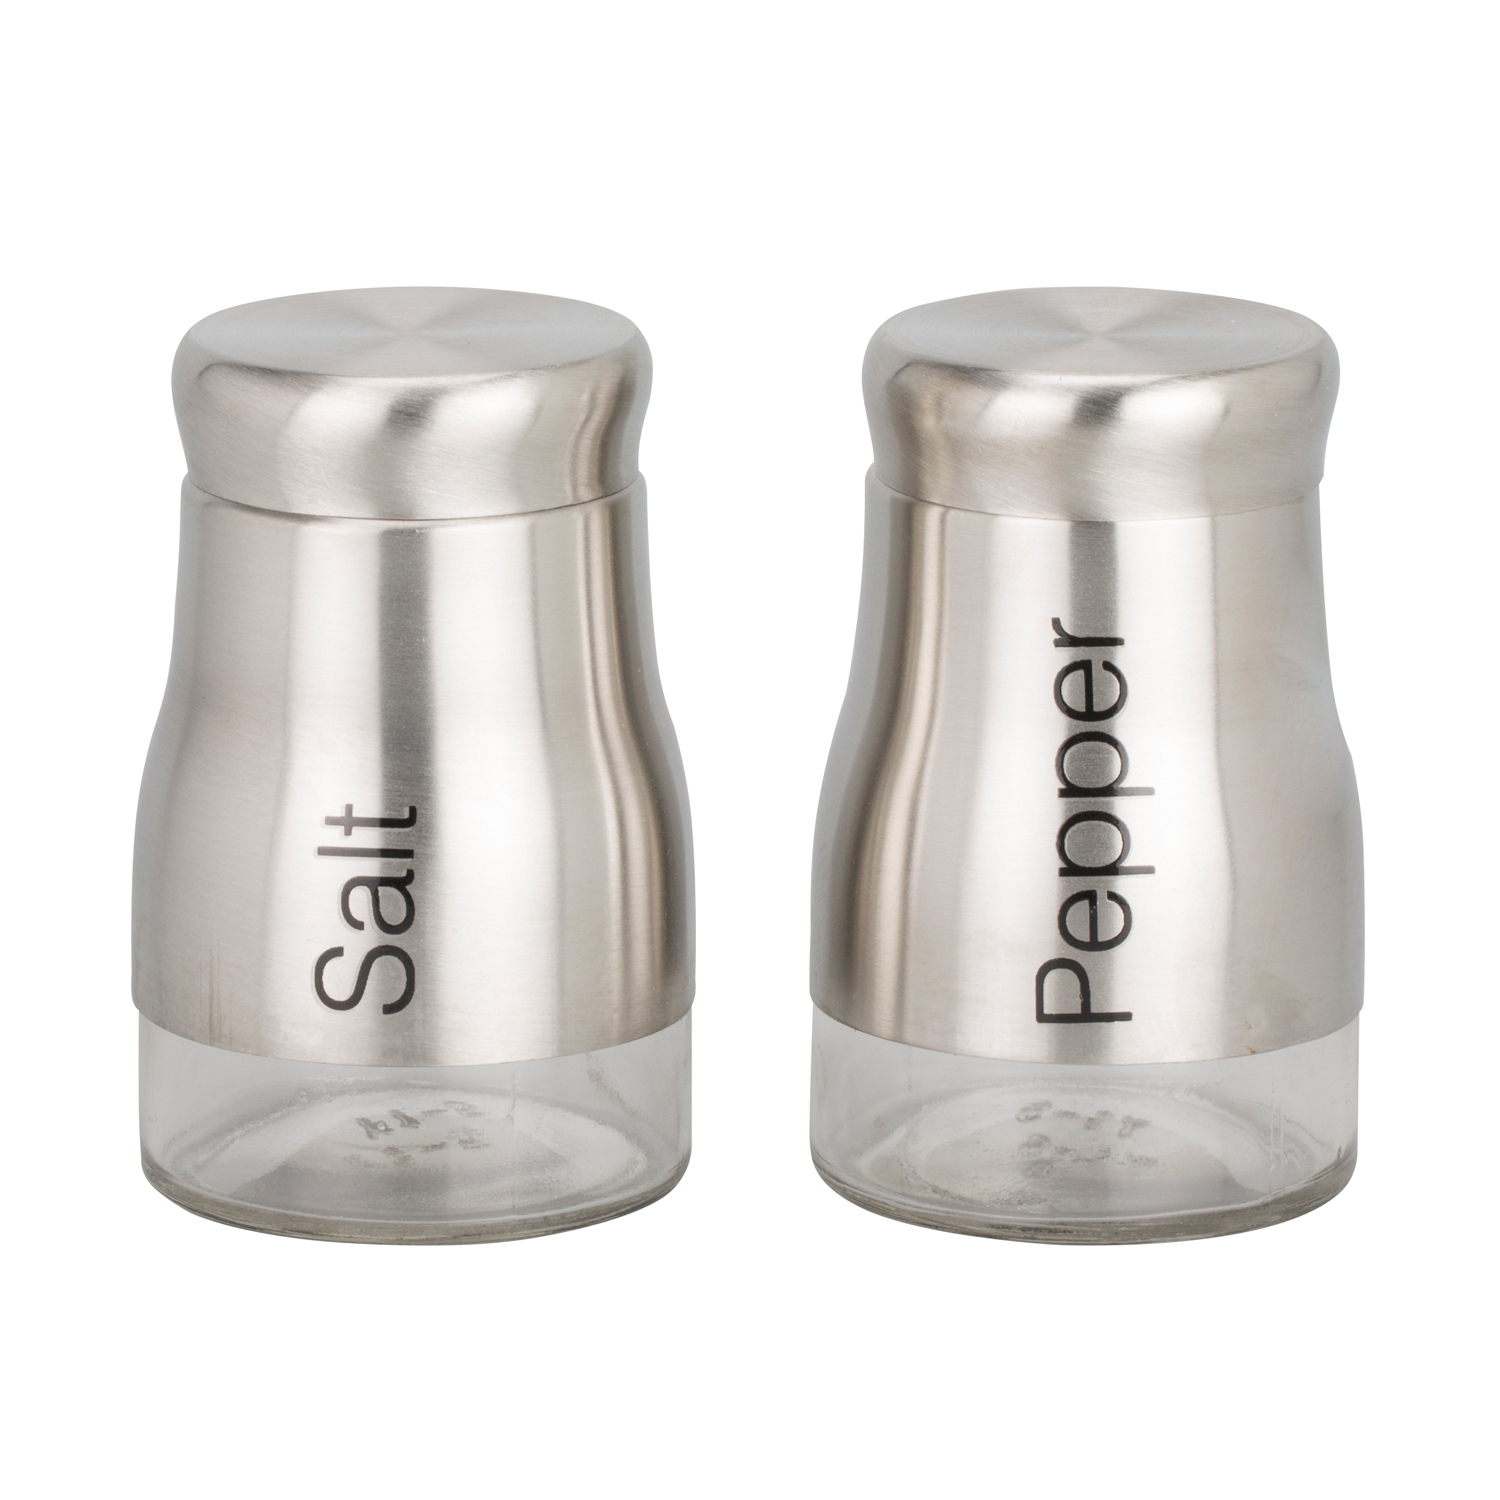 Silver Stainless Steel and Glass Salt and Pepper Mill Set Image 1